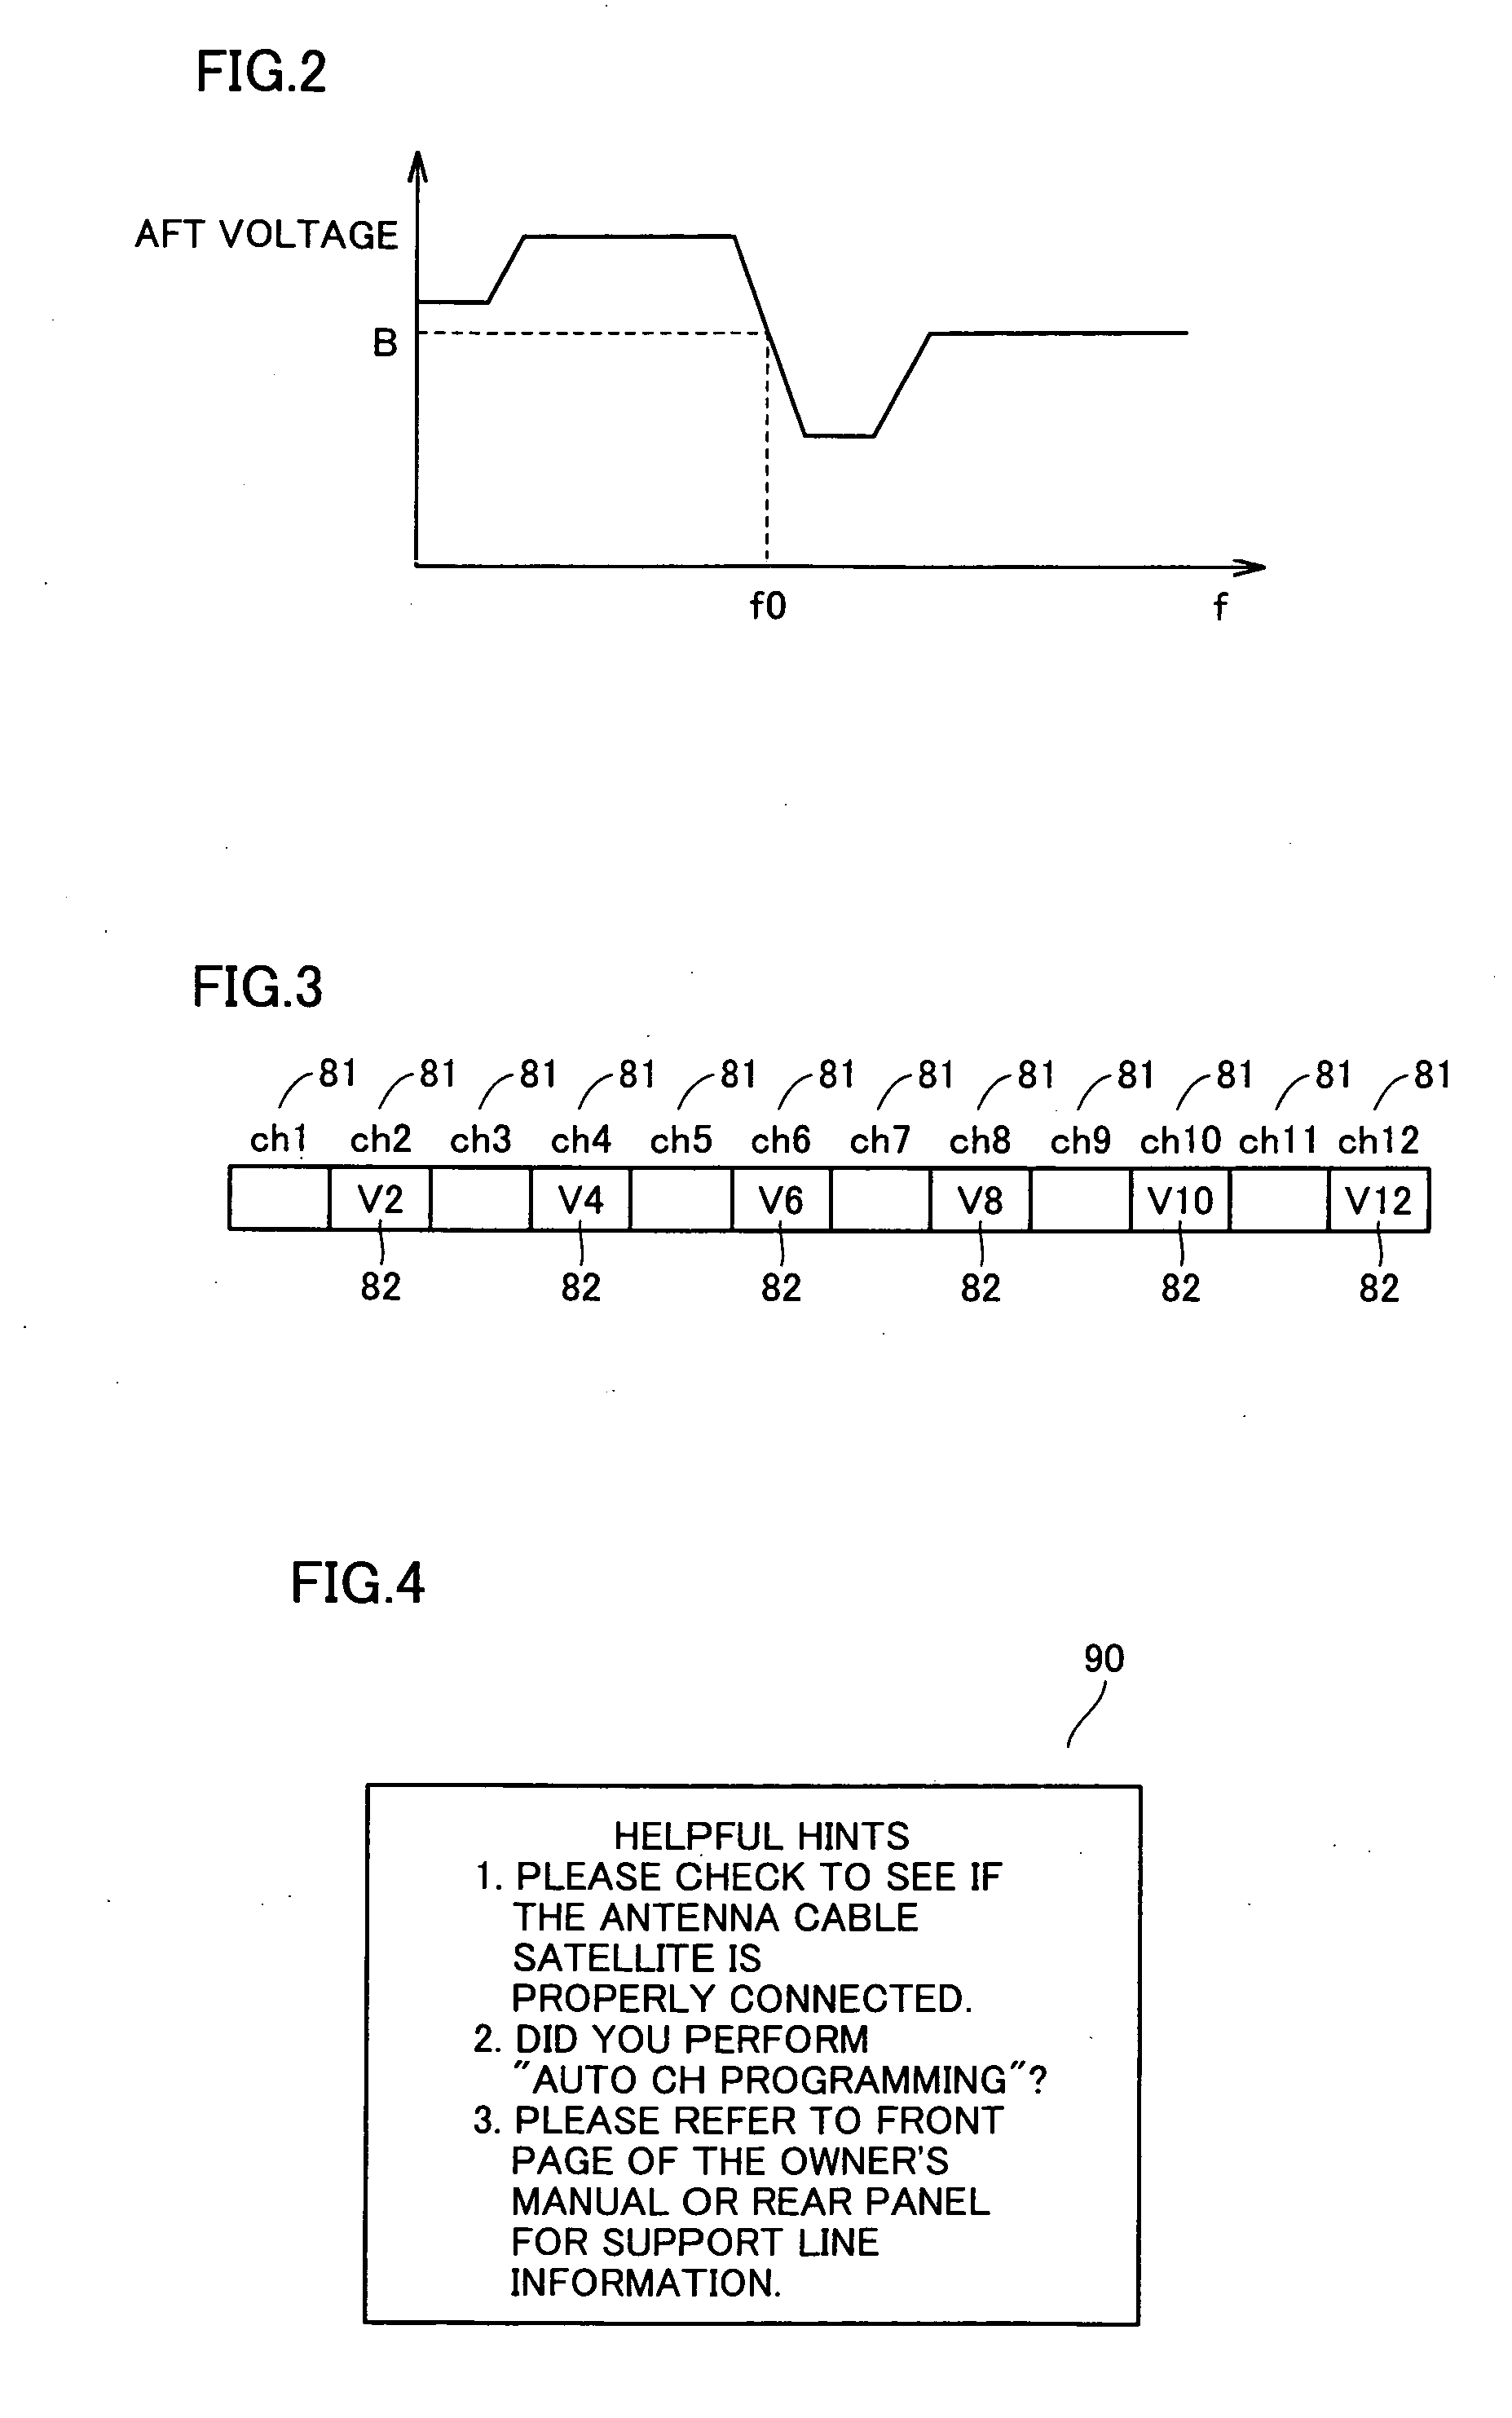 Broadcast signal reception apparatus attaining channel selection function